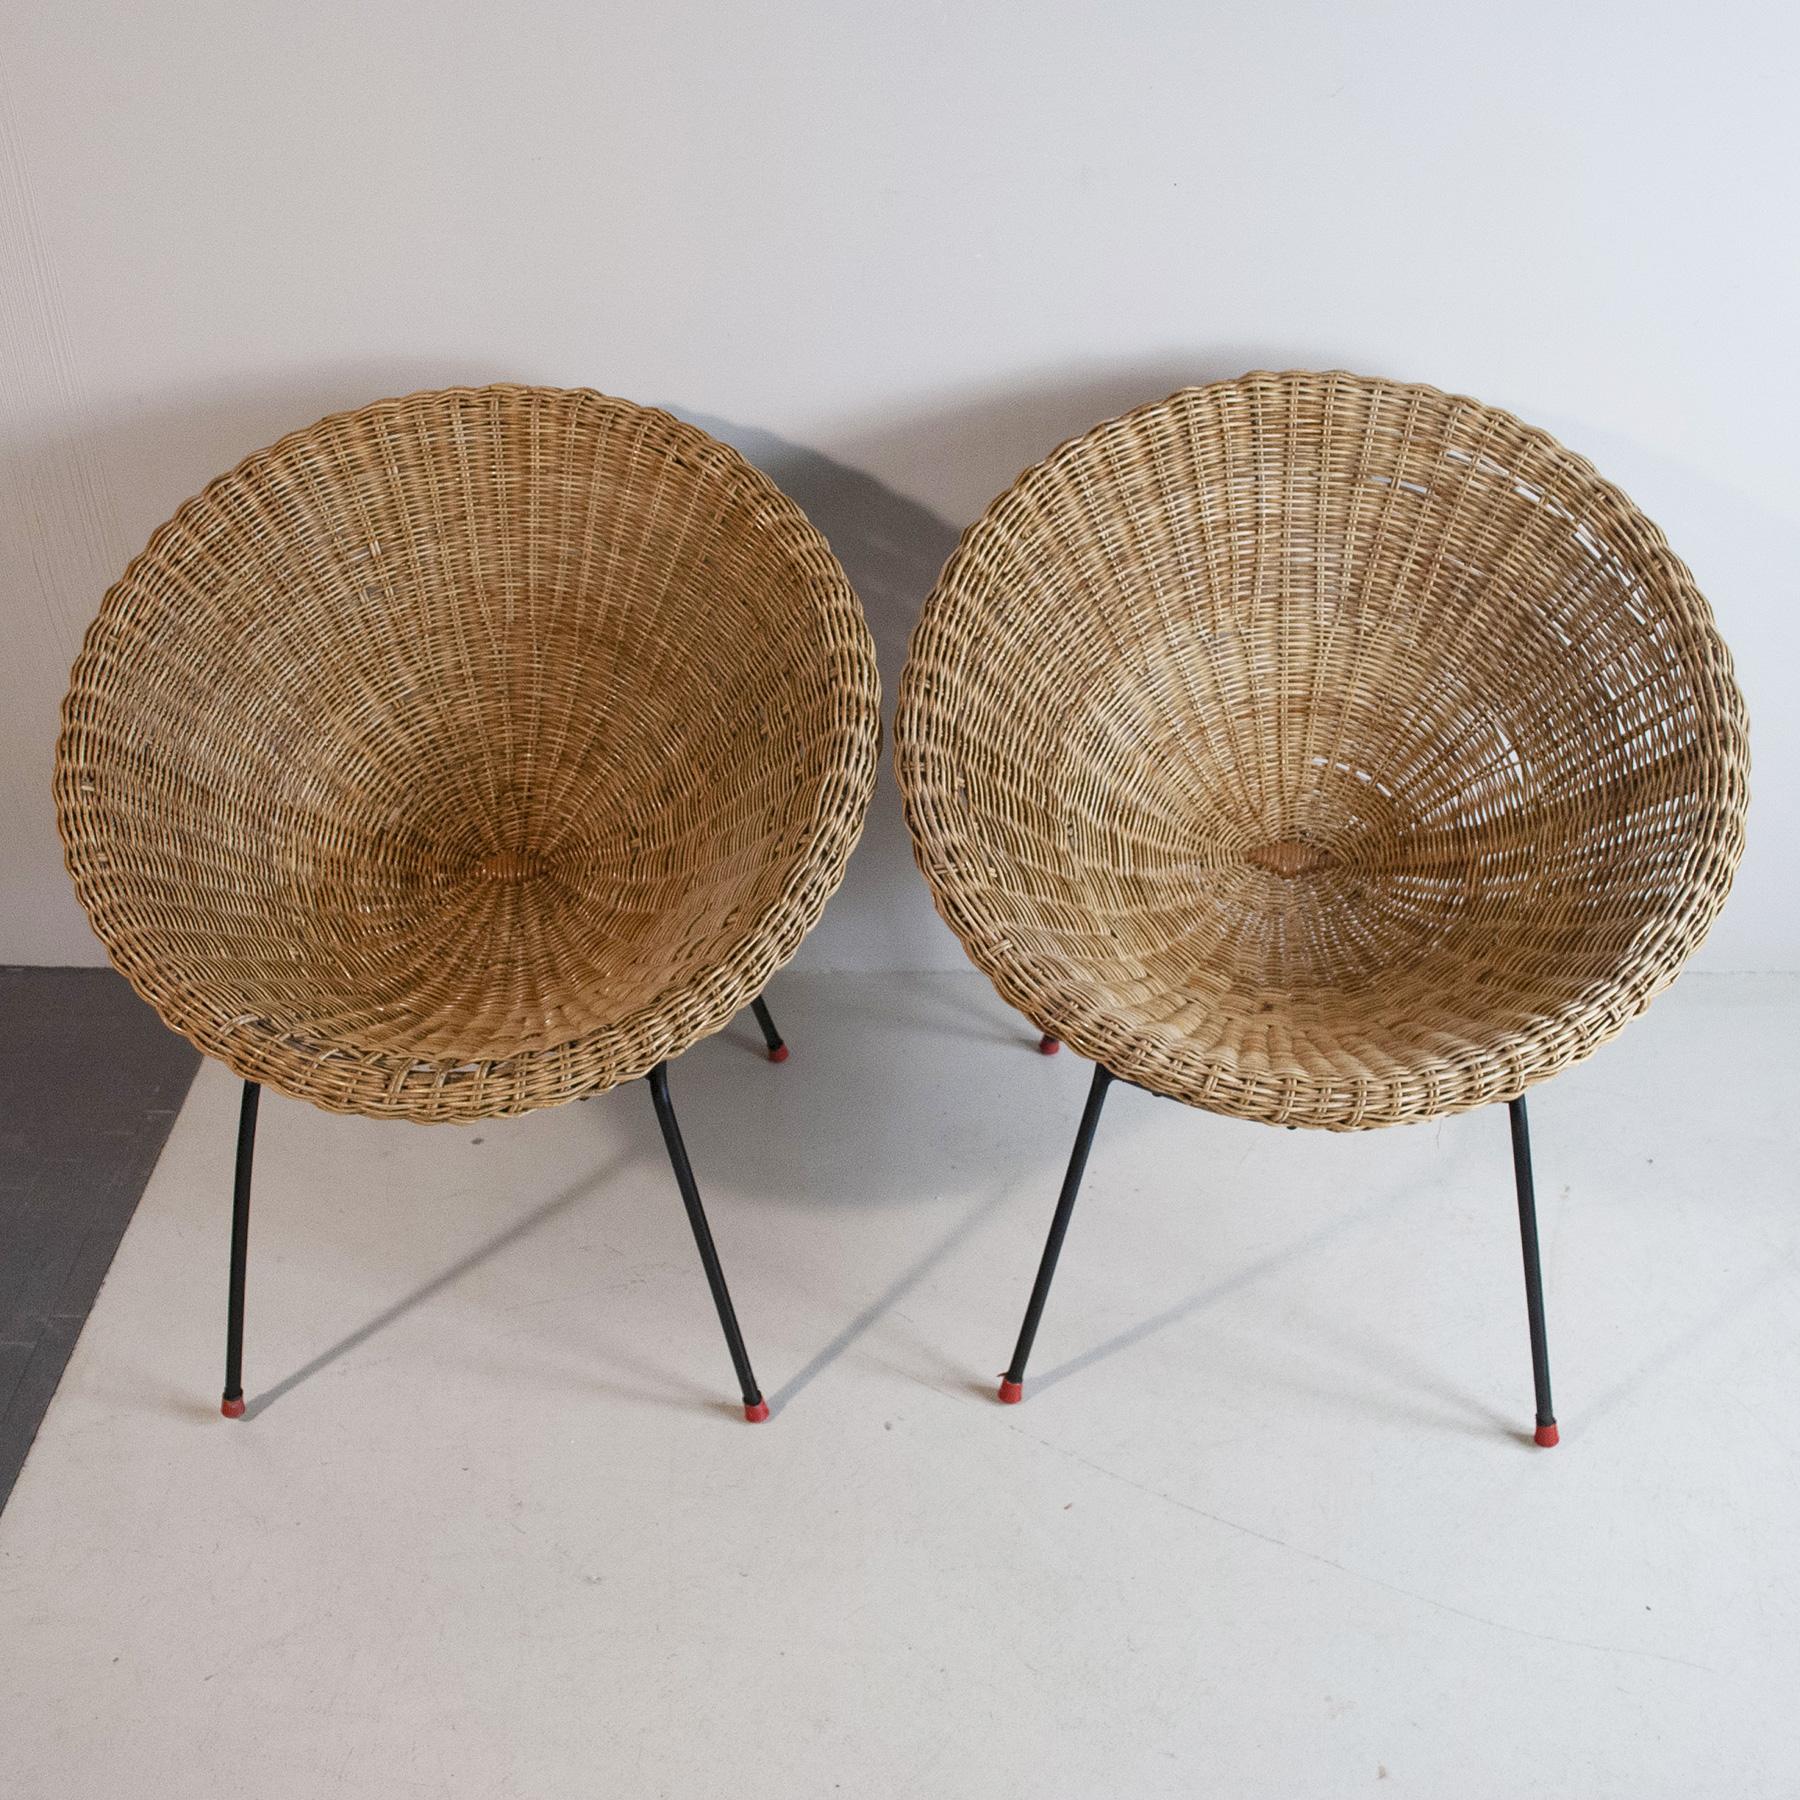 Mid-20th Century Italian Midcentury 1960s Eggs Cane Chairs For Sale